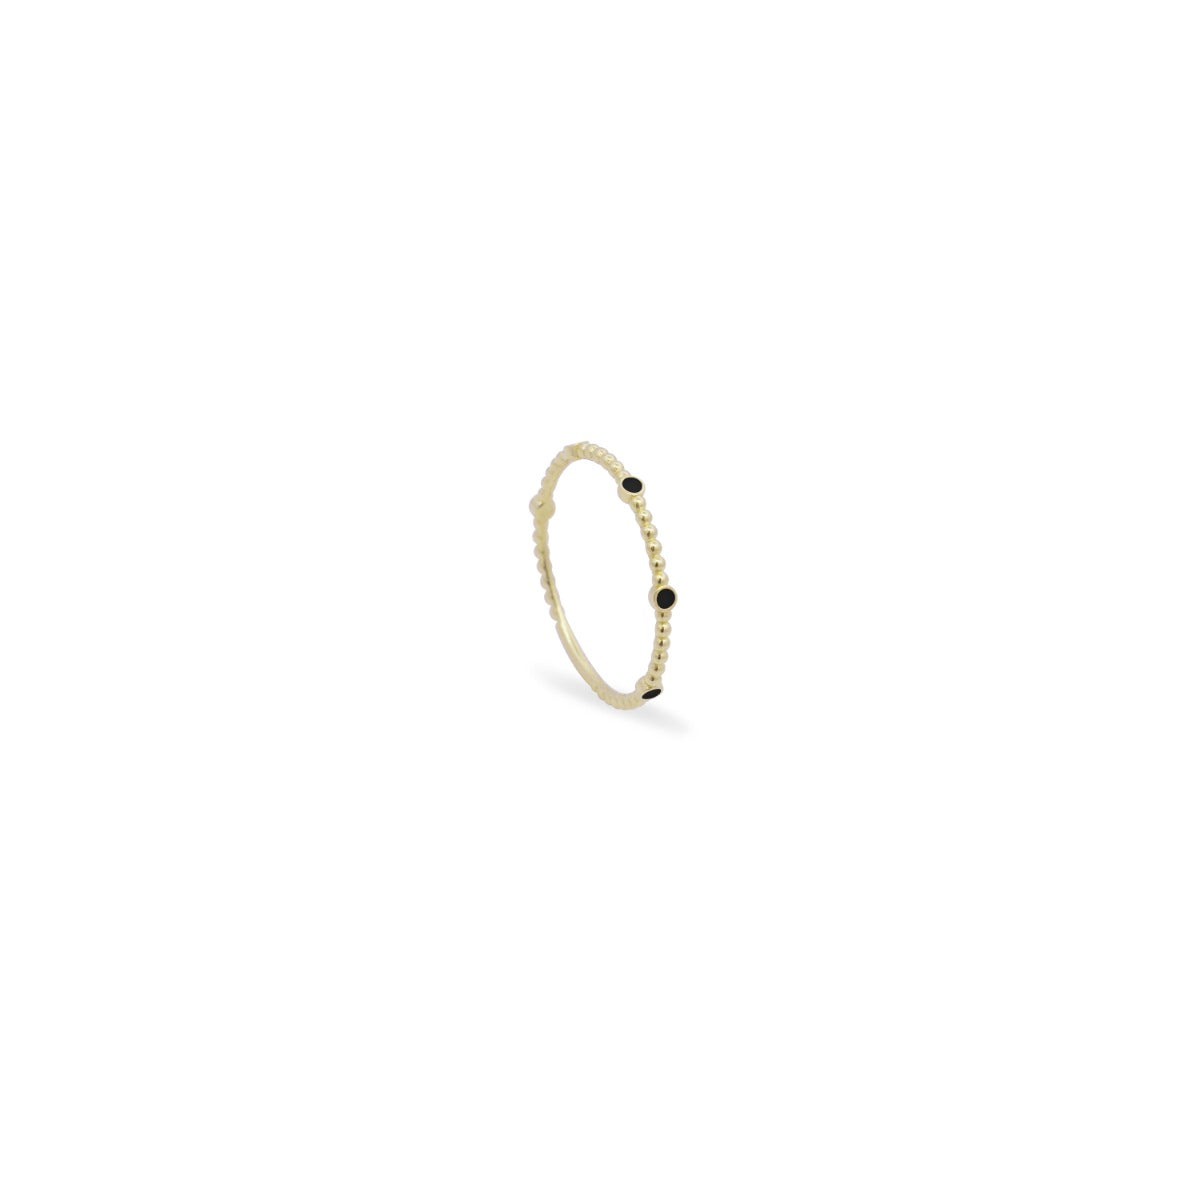 Rings - Knurled wedding ring and enamel dot - ORO18KT - 2 | Rue des Mille